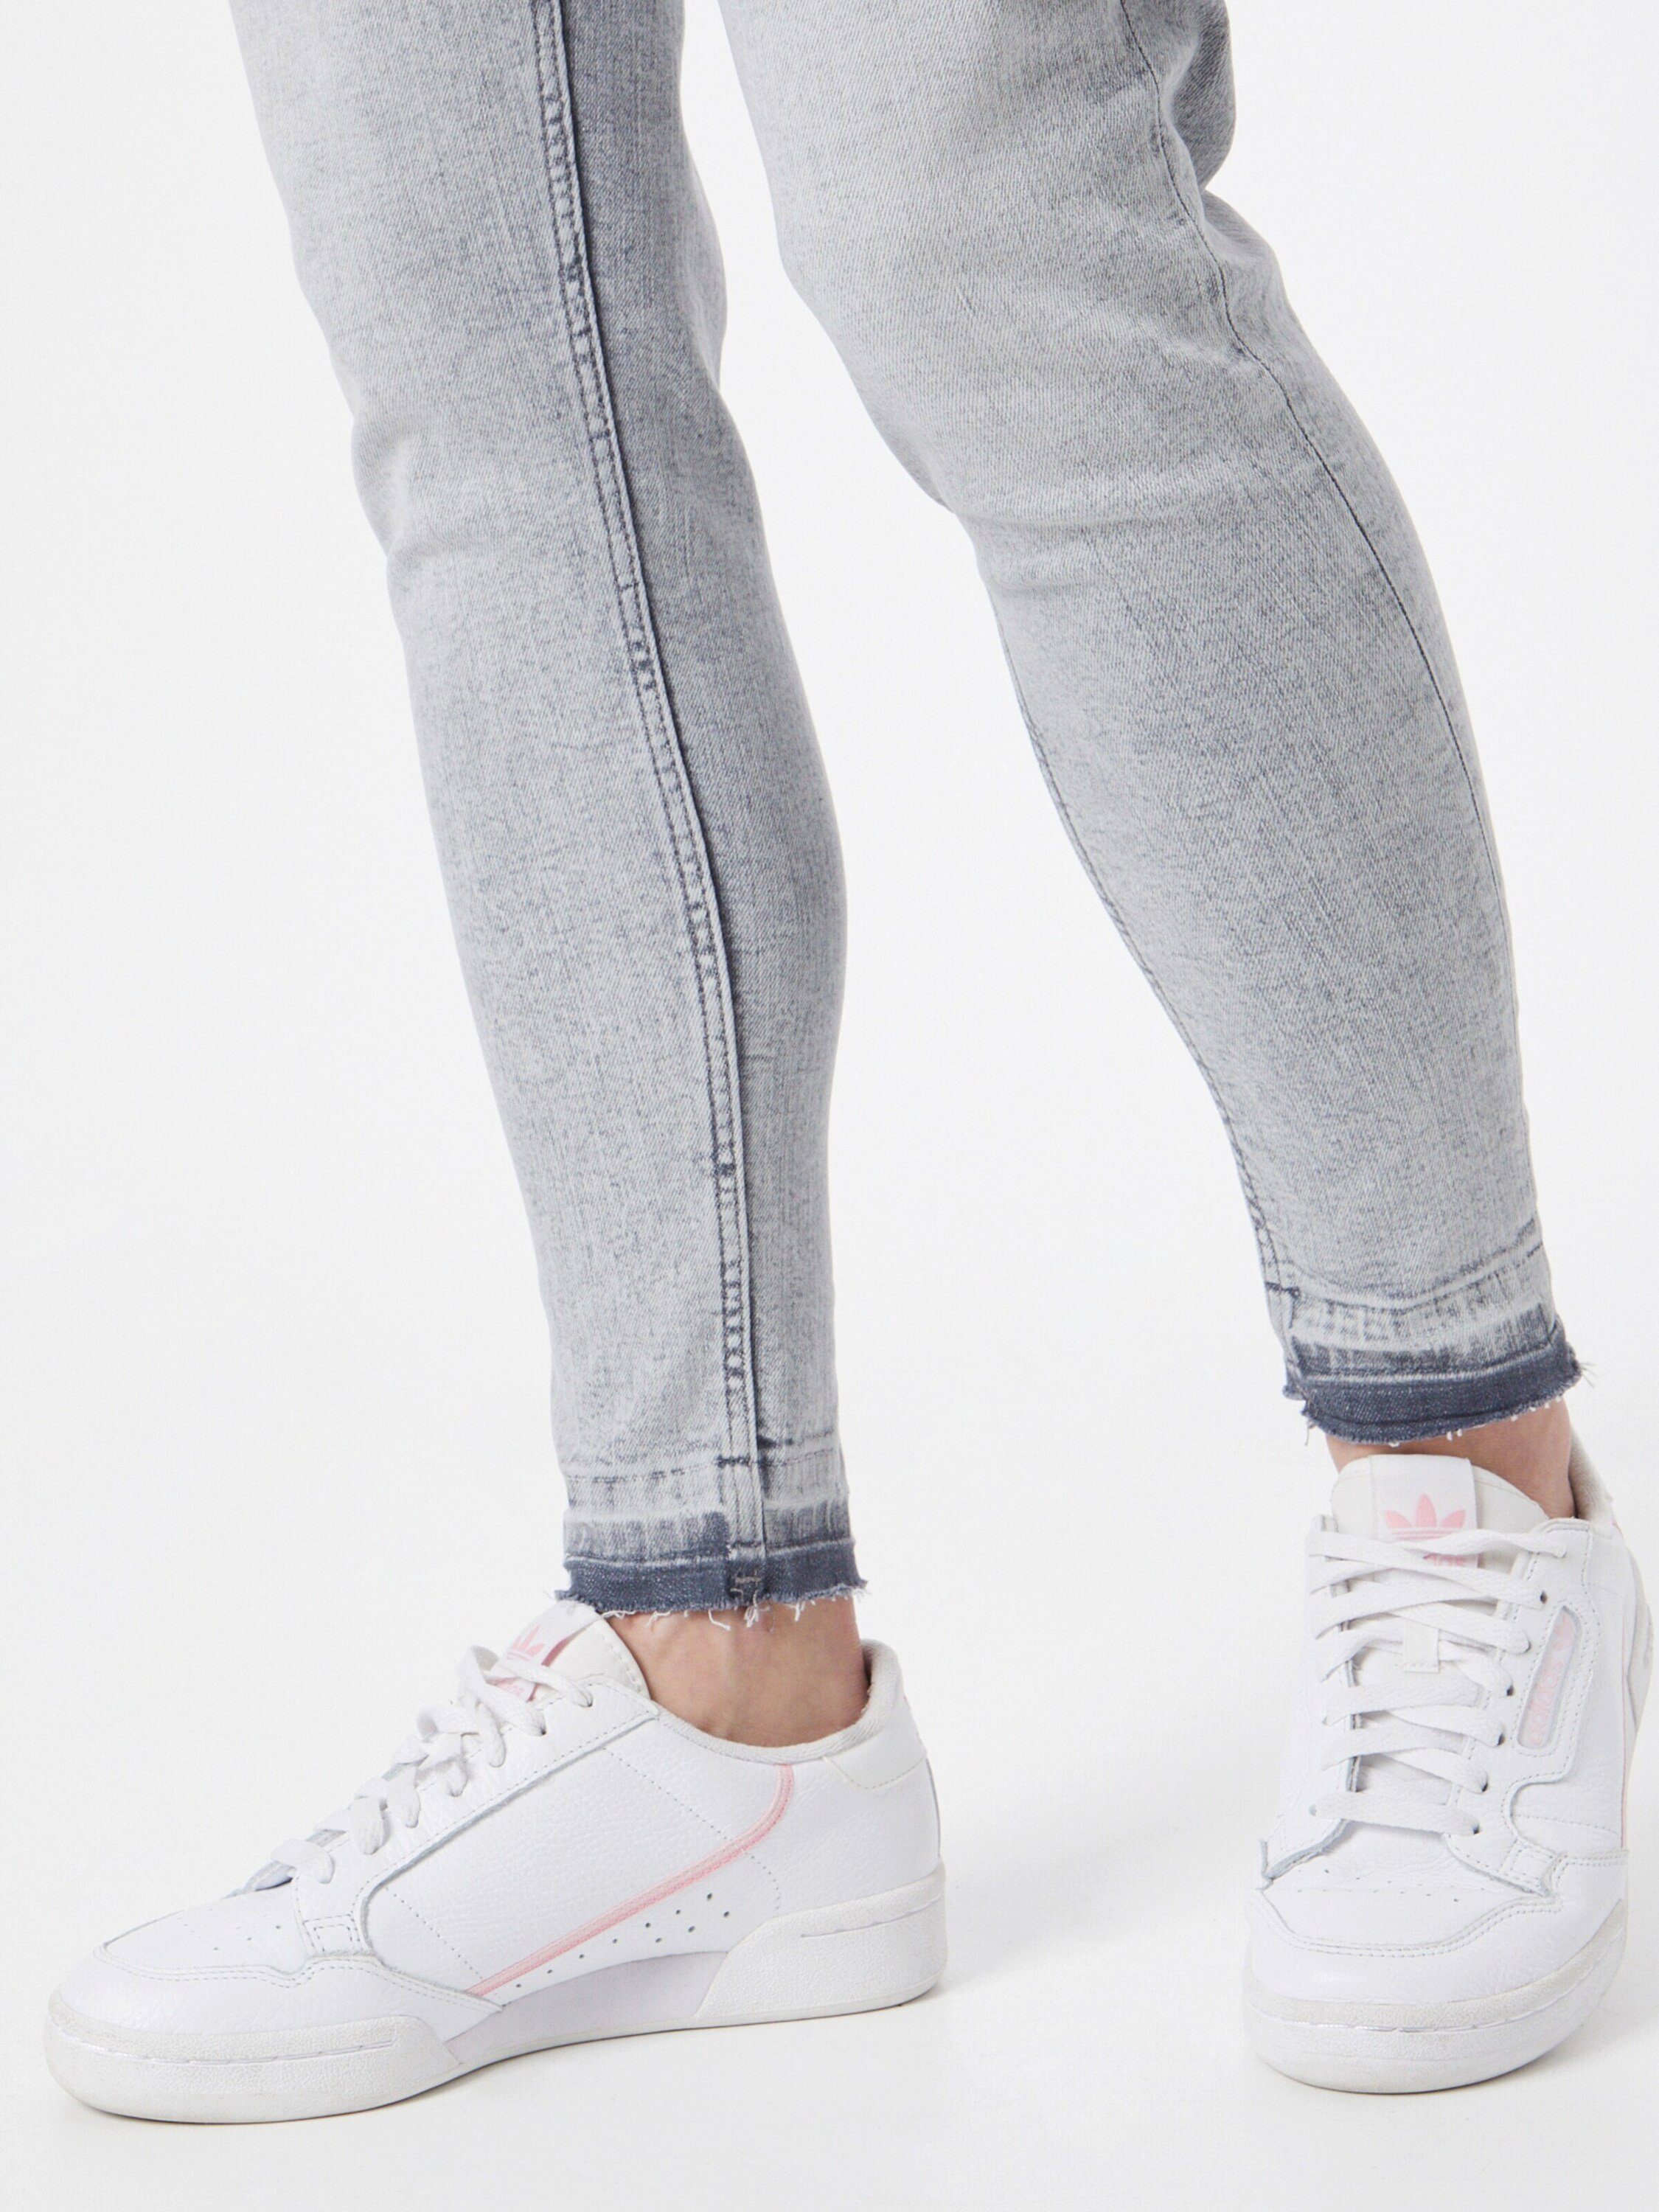 (1-tlg) QS Weiteres 7/8-Jeans Detail